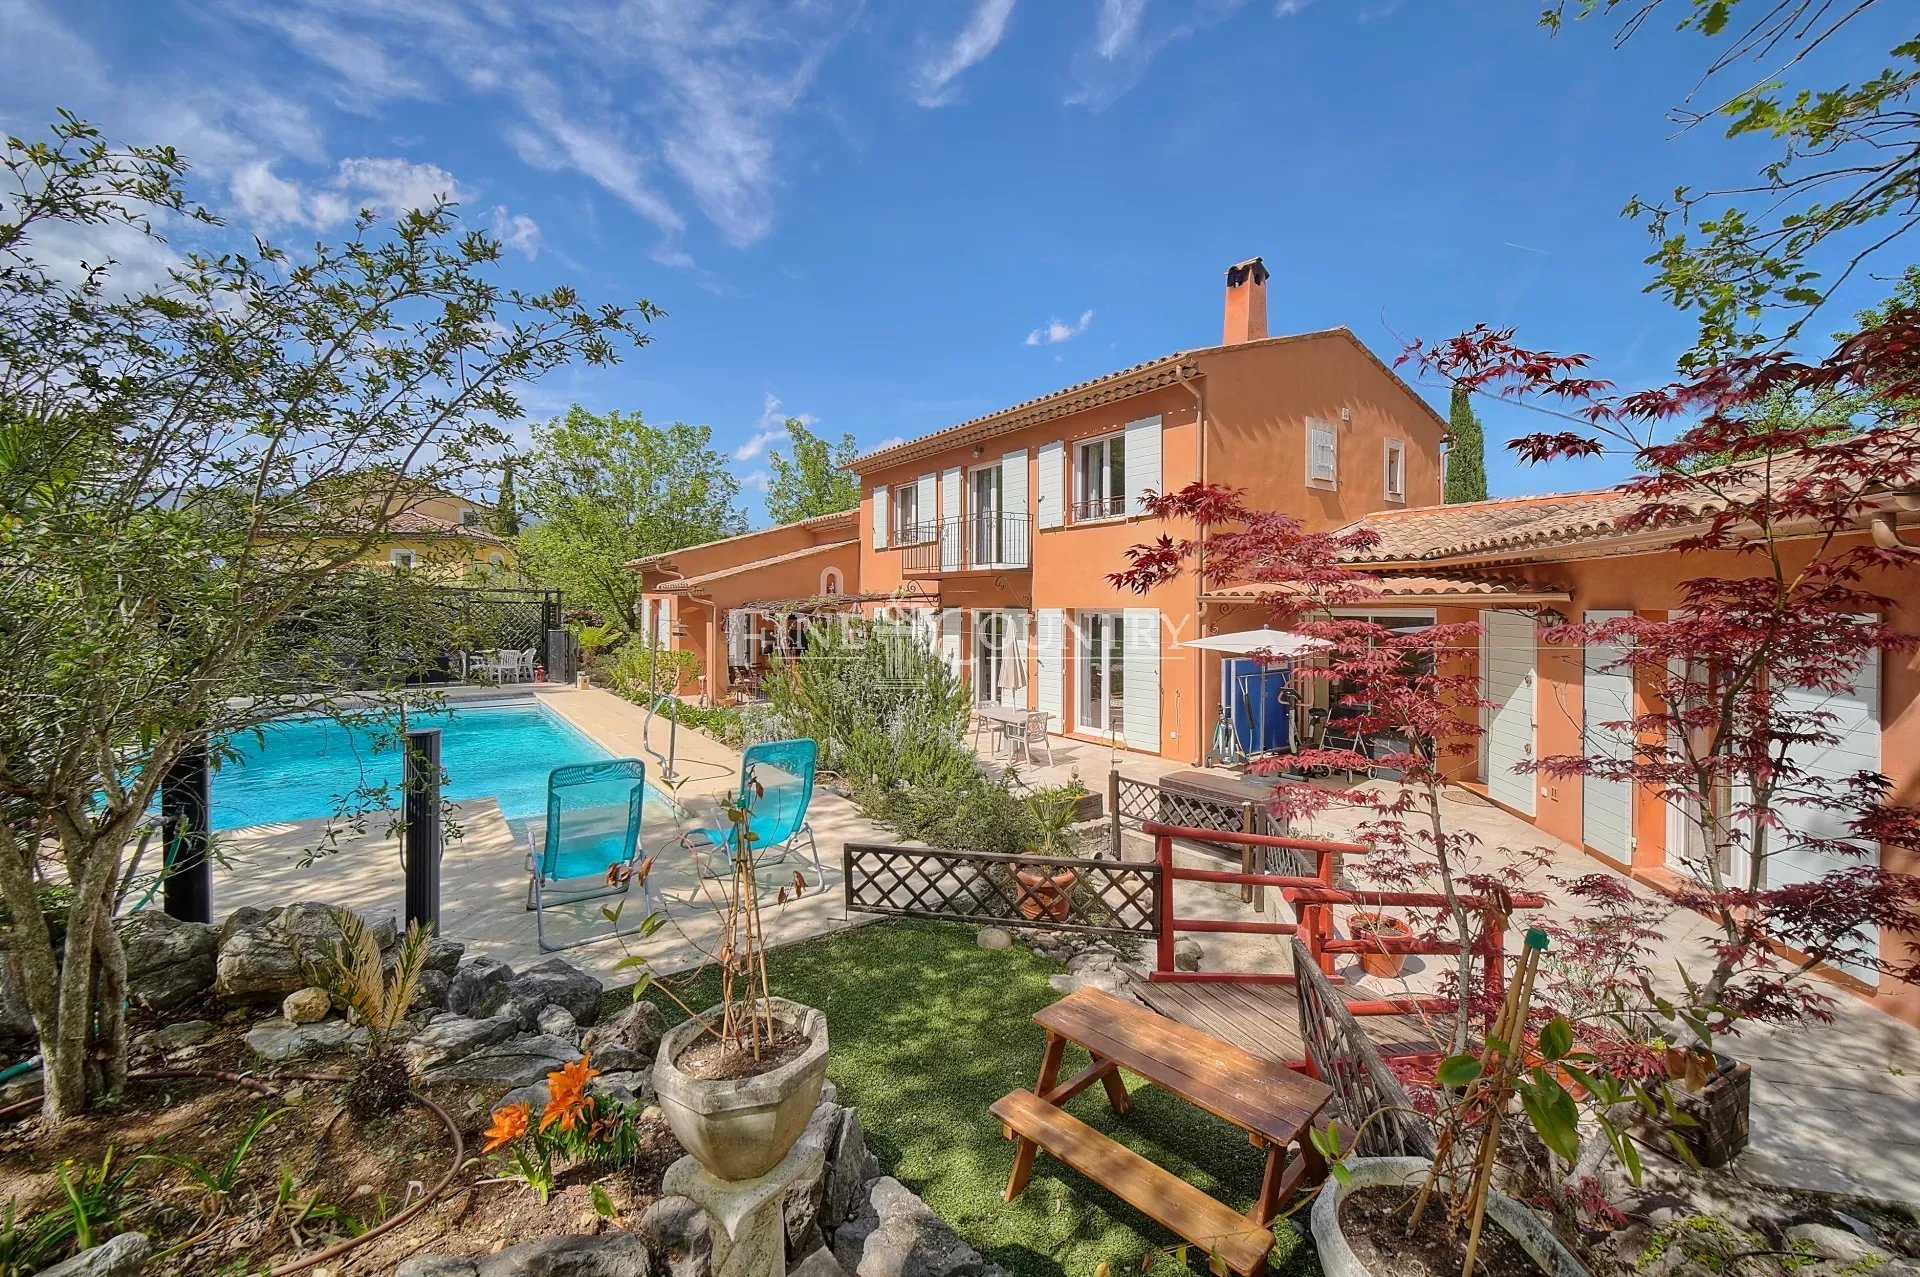 Villa for sale in Fayence with swimming pool.